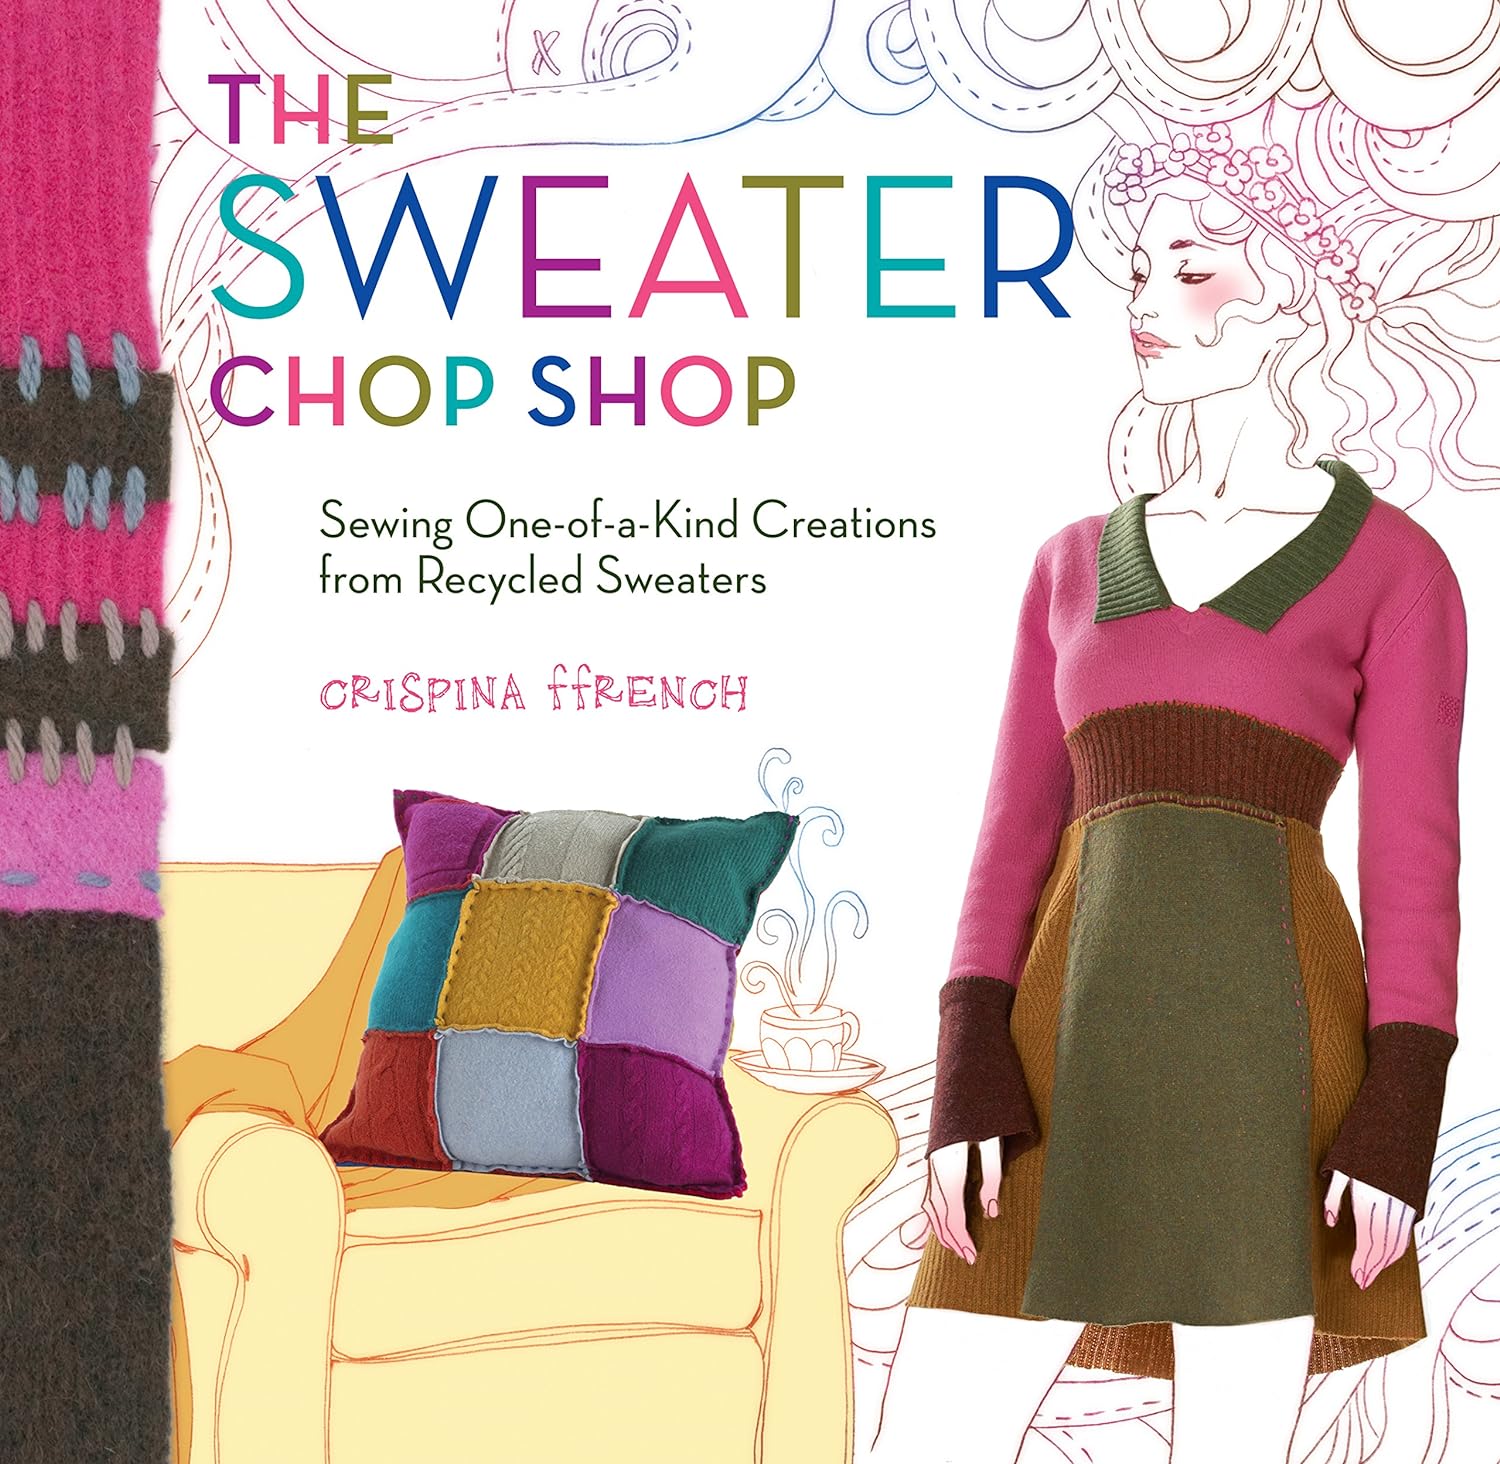 The Sweater Chop Shop: Sewing One-of-a-Kind Creations from Recycled Sweaters